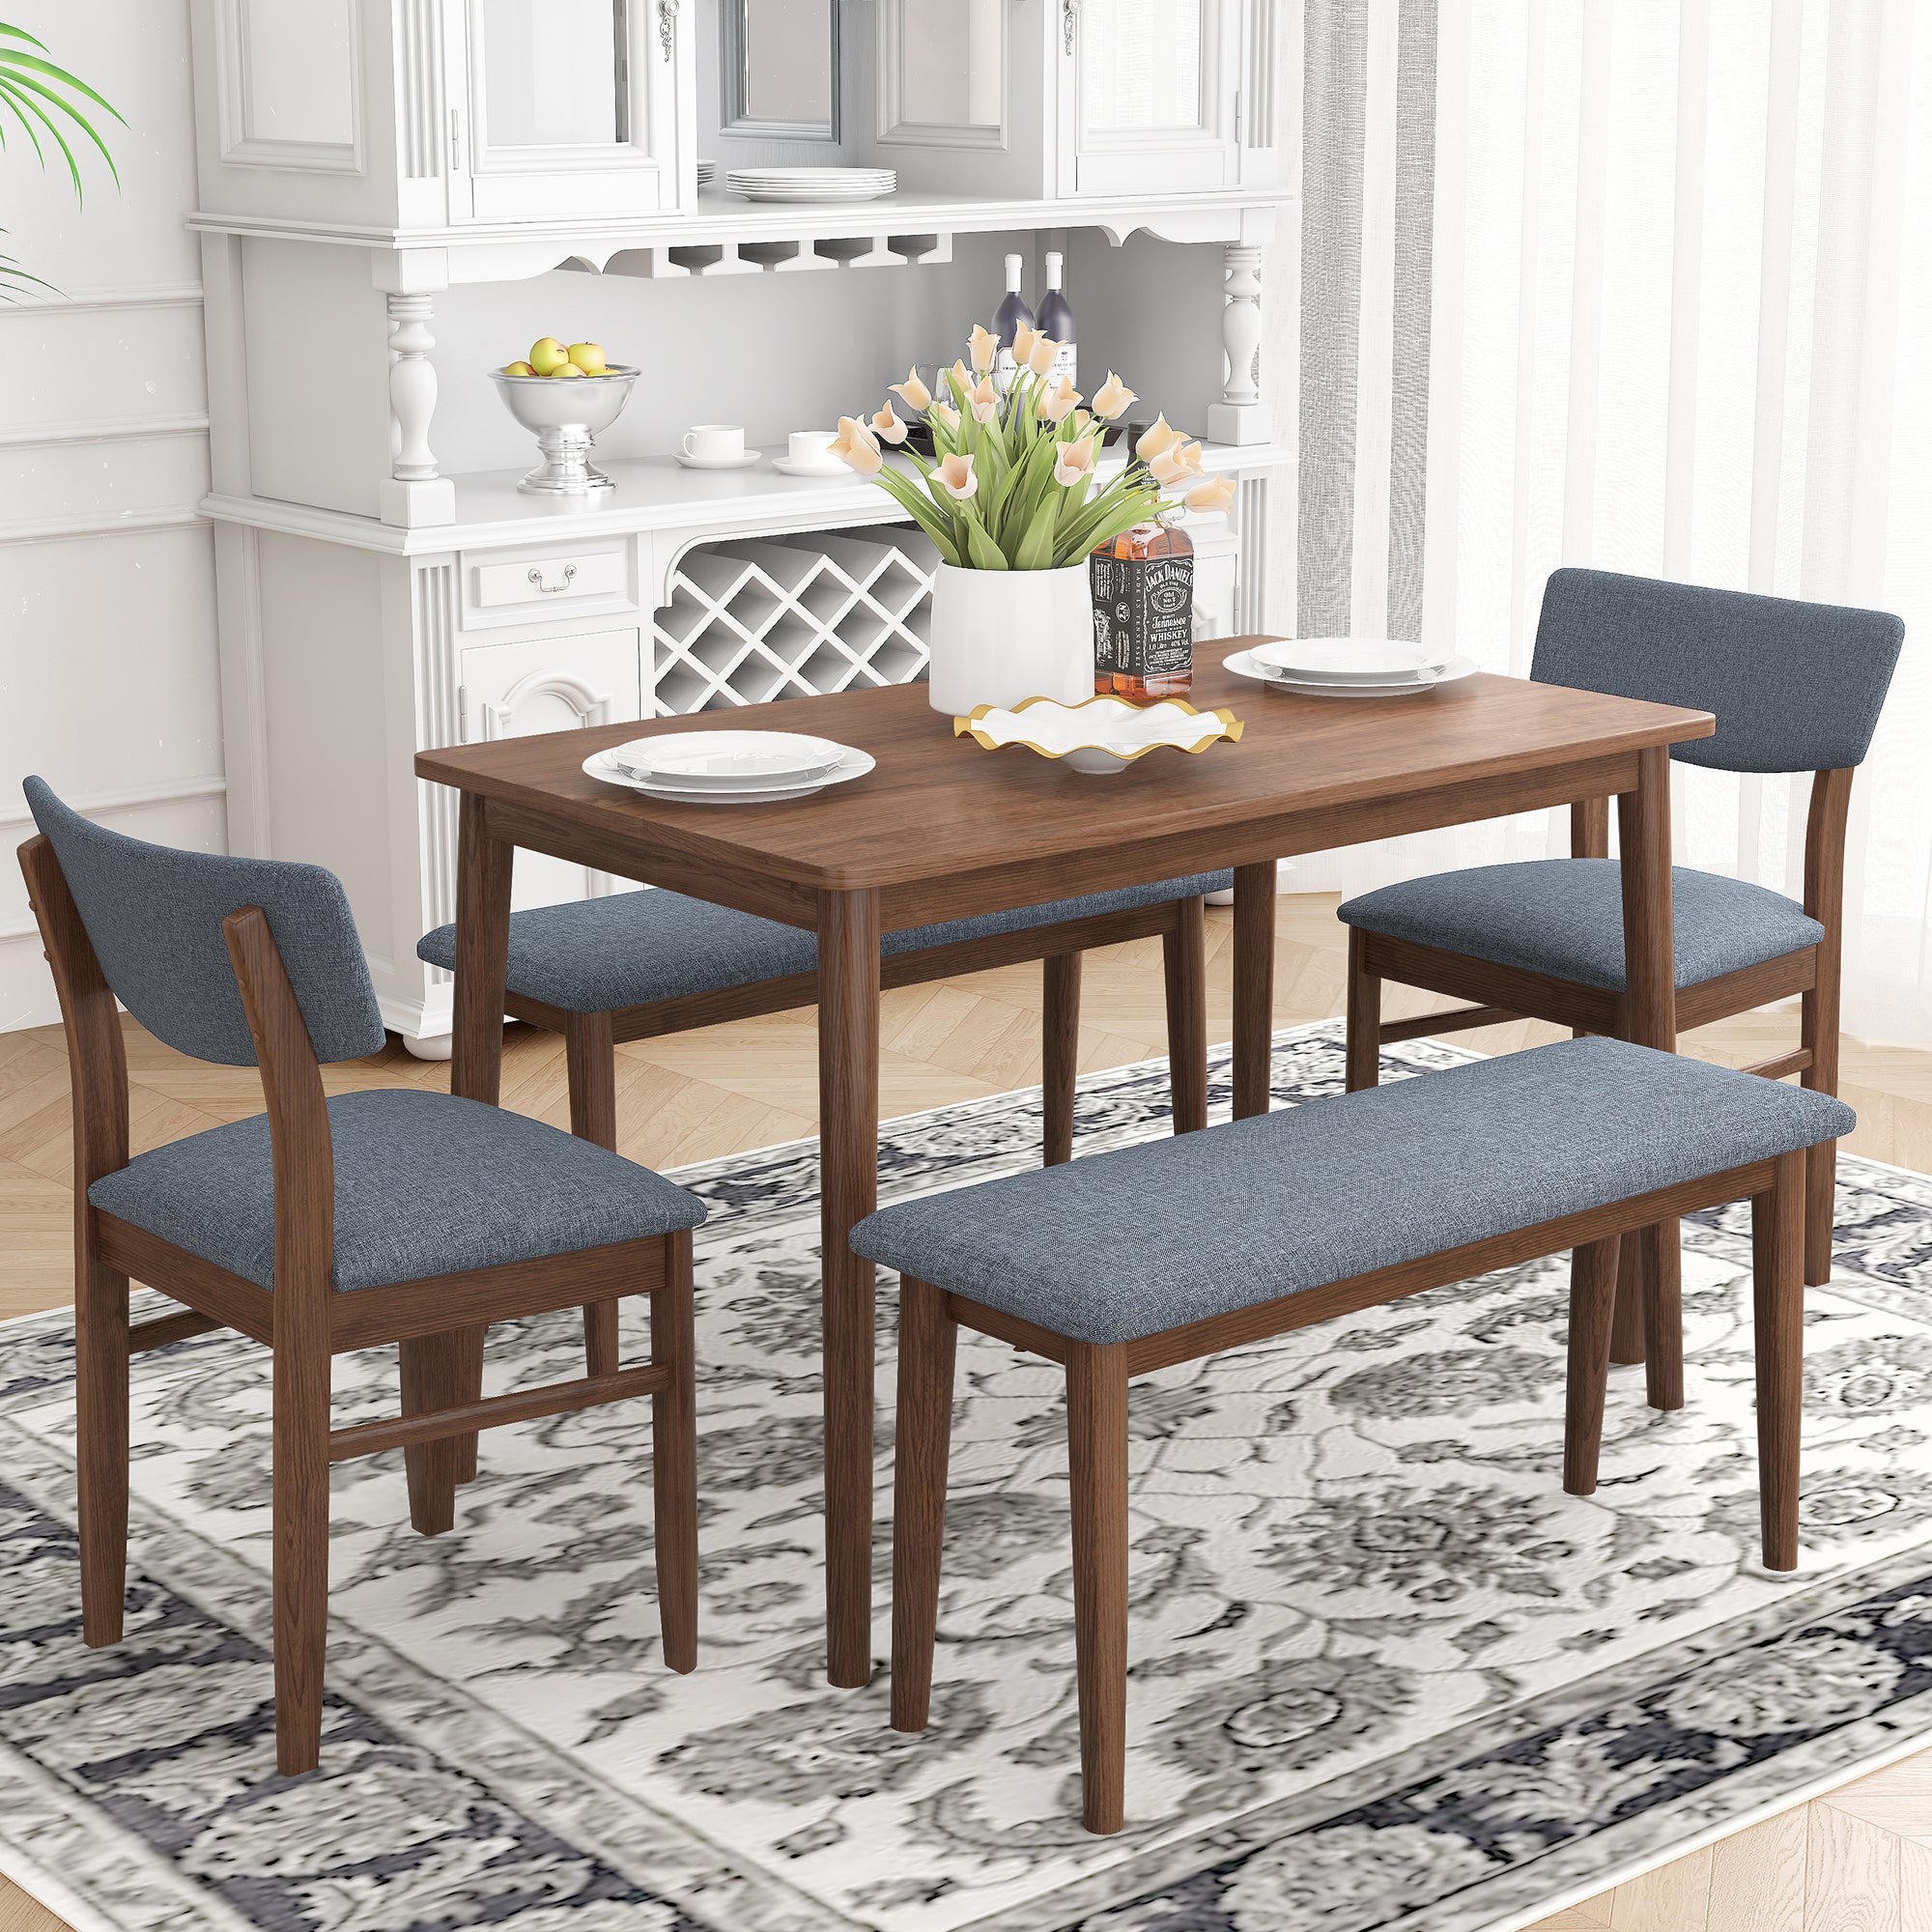 Modern Rubberwood Kitchen and Dining Furniture Set with Table, 2 Cushioned Benches and 2 Cushioned Chairs, Grey